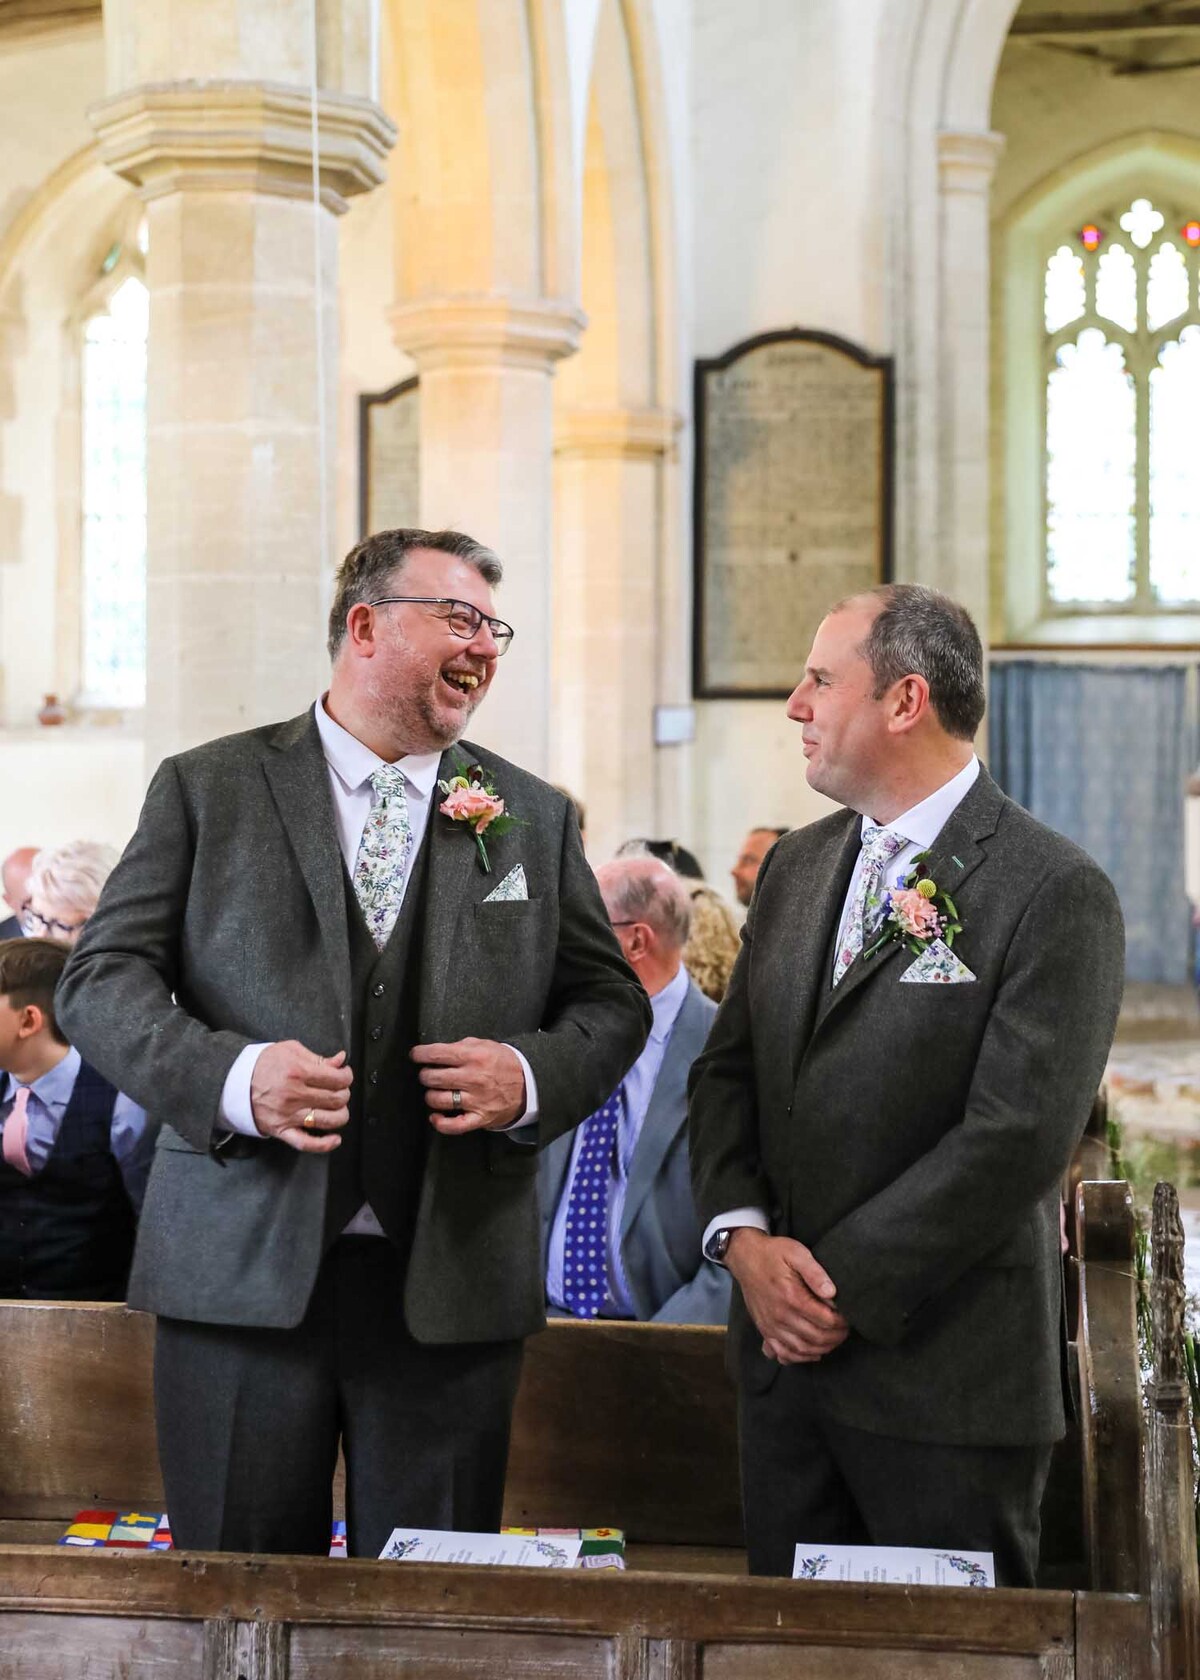 A groom and his bestman laughing at the front of a suffolk church before the wedding ceremony captured by Suffolk Wedding Photographers Hayley Denston Photography